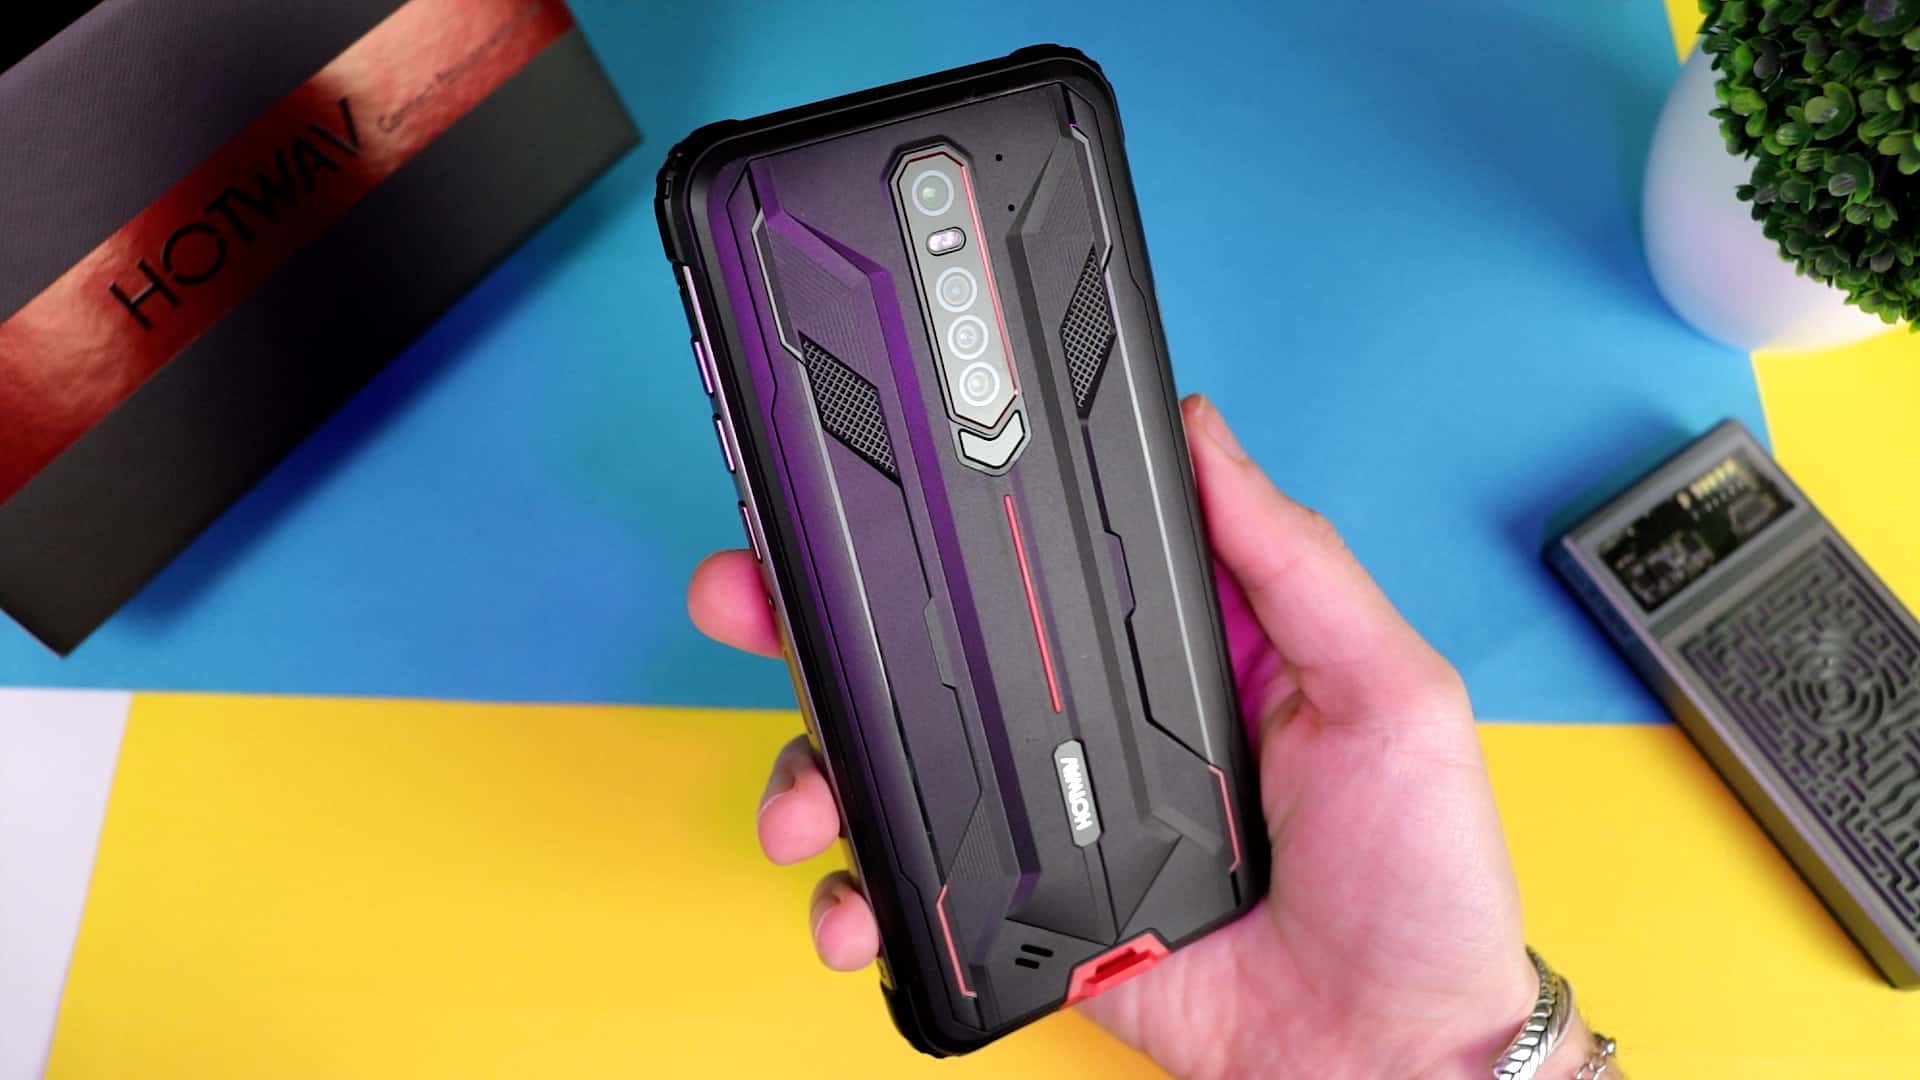 Hotwav CYBER 7 rugged smartphone review by unboxing lab